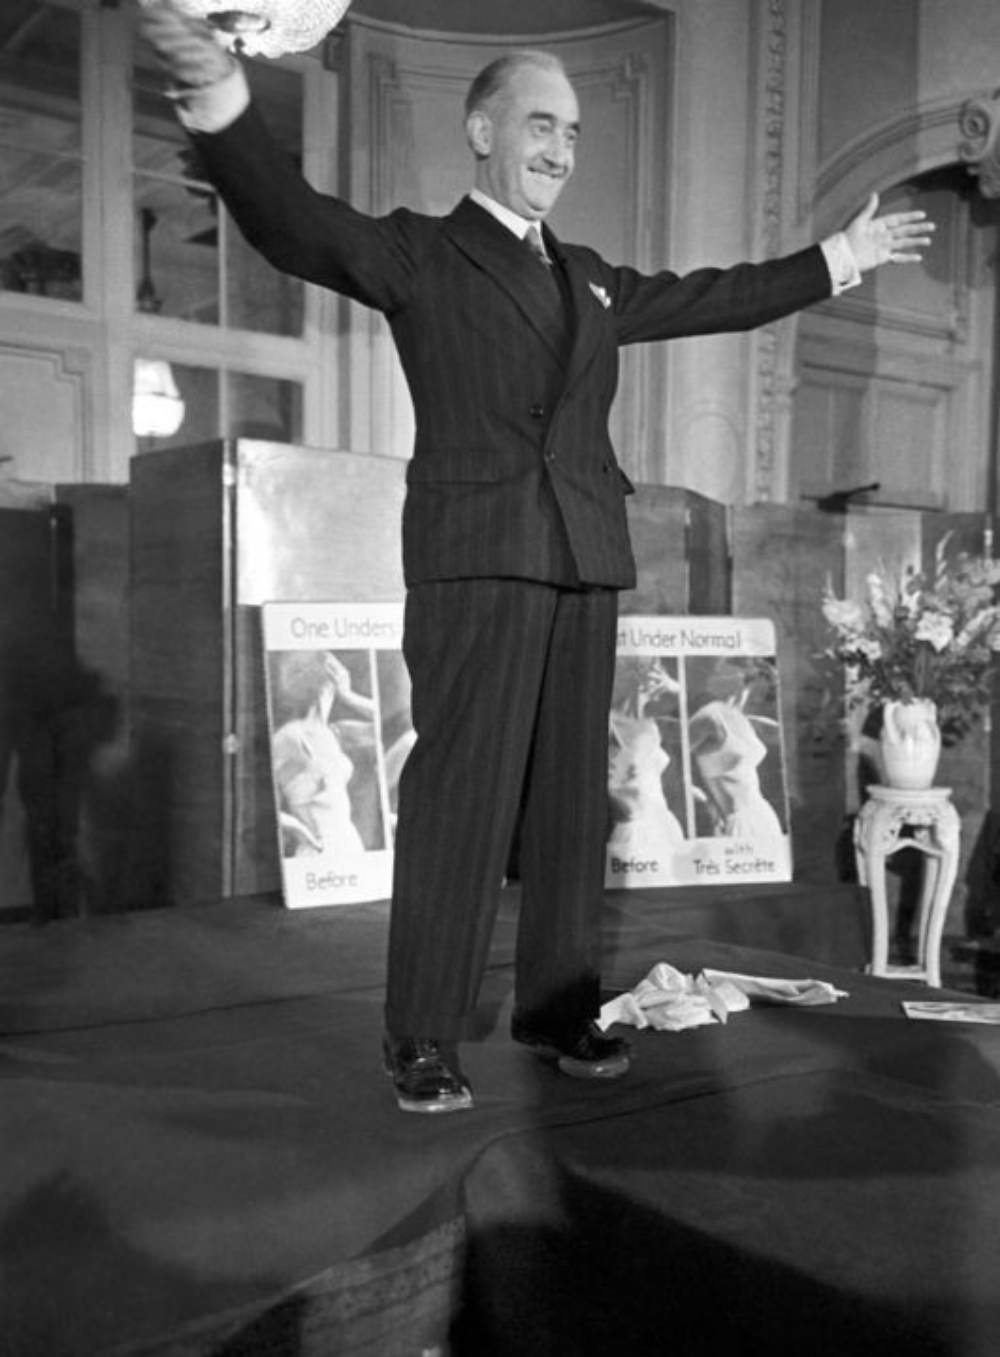 A gentleman, who is believed to have work for the lingerie company, is seen taking to the stage to promote the product, with the adverts for the bra seen behind him.